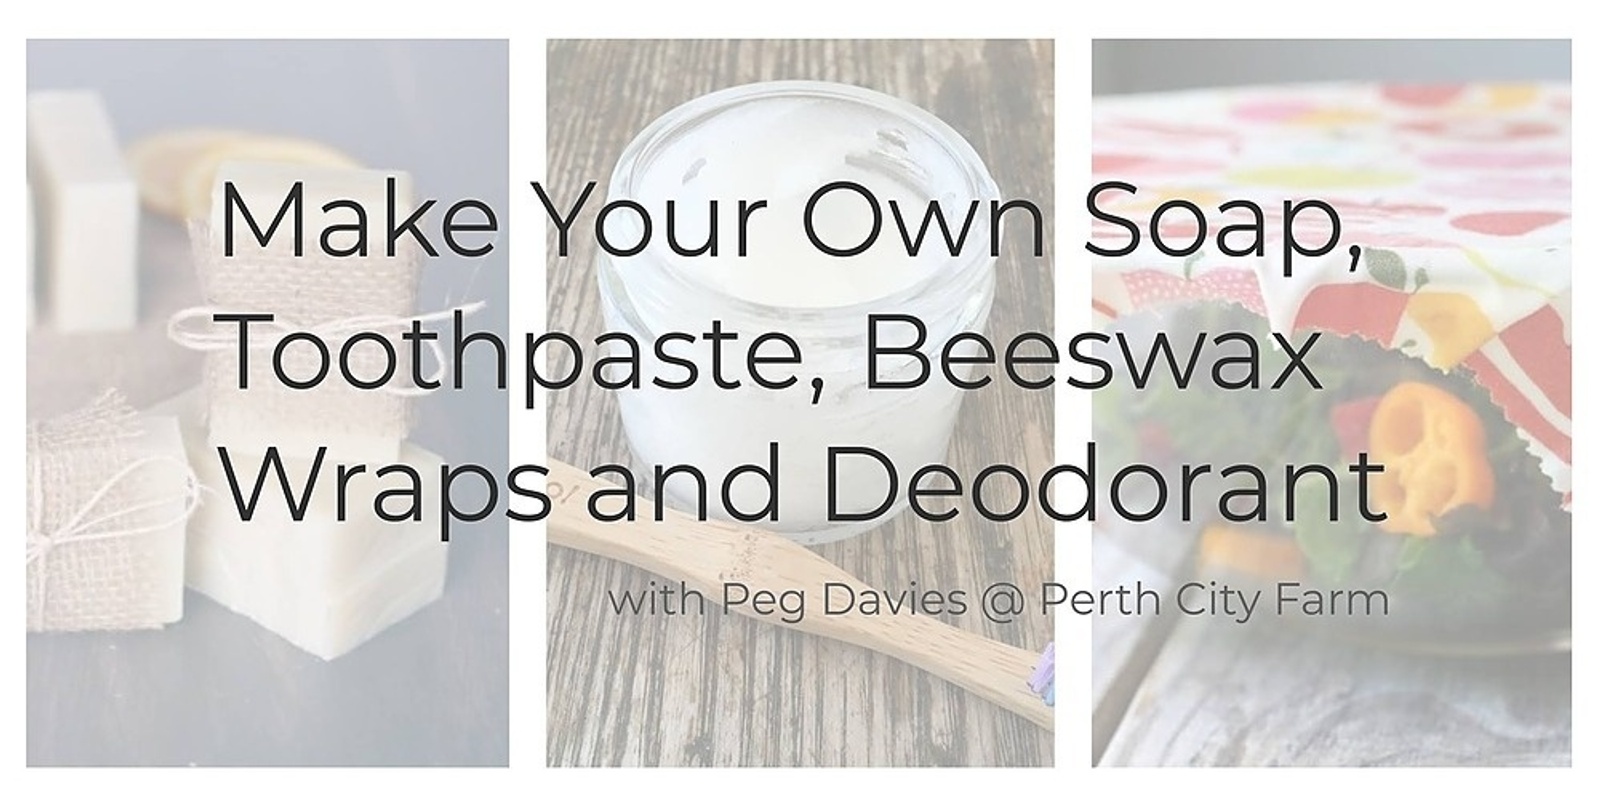 Banner image for Make Your Own Soap, Beeswax Wraps, Deodorant and Toothpaste Workshop